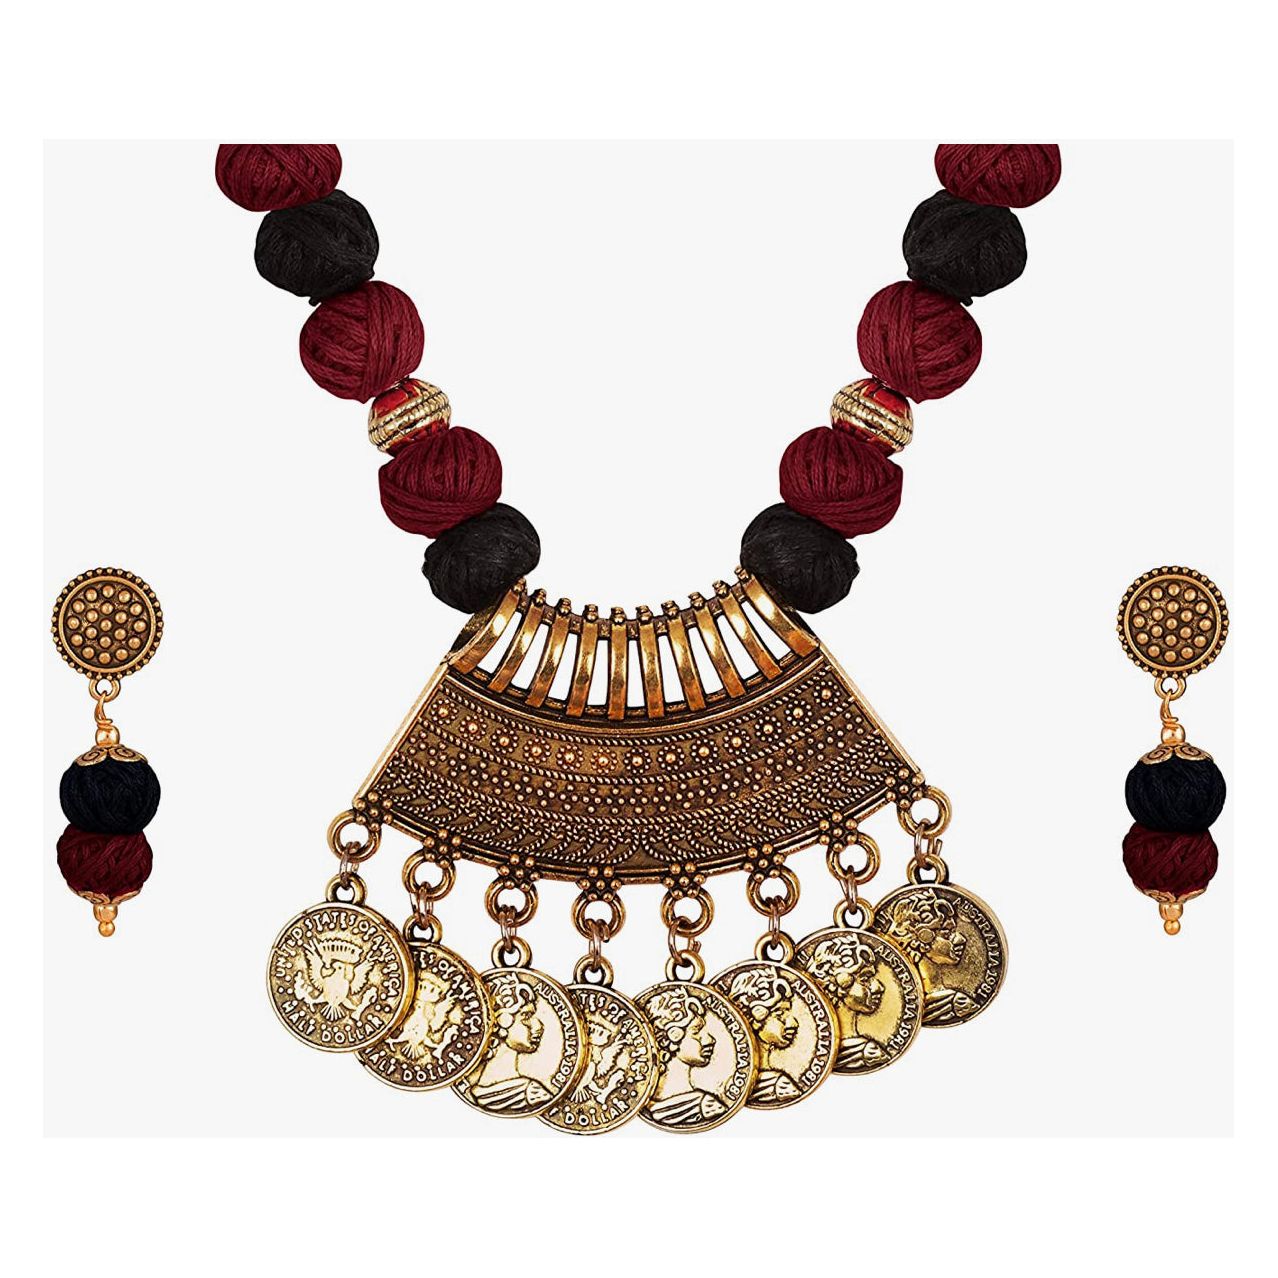 Tribal Pendant with Oxidized Beads Choker Necklace Set